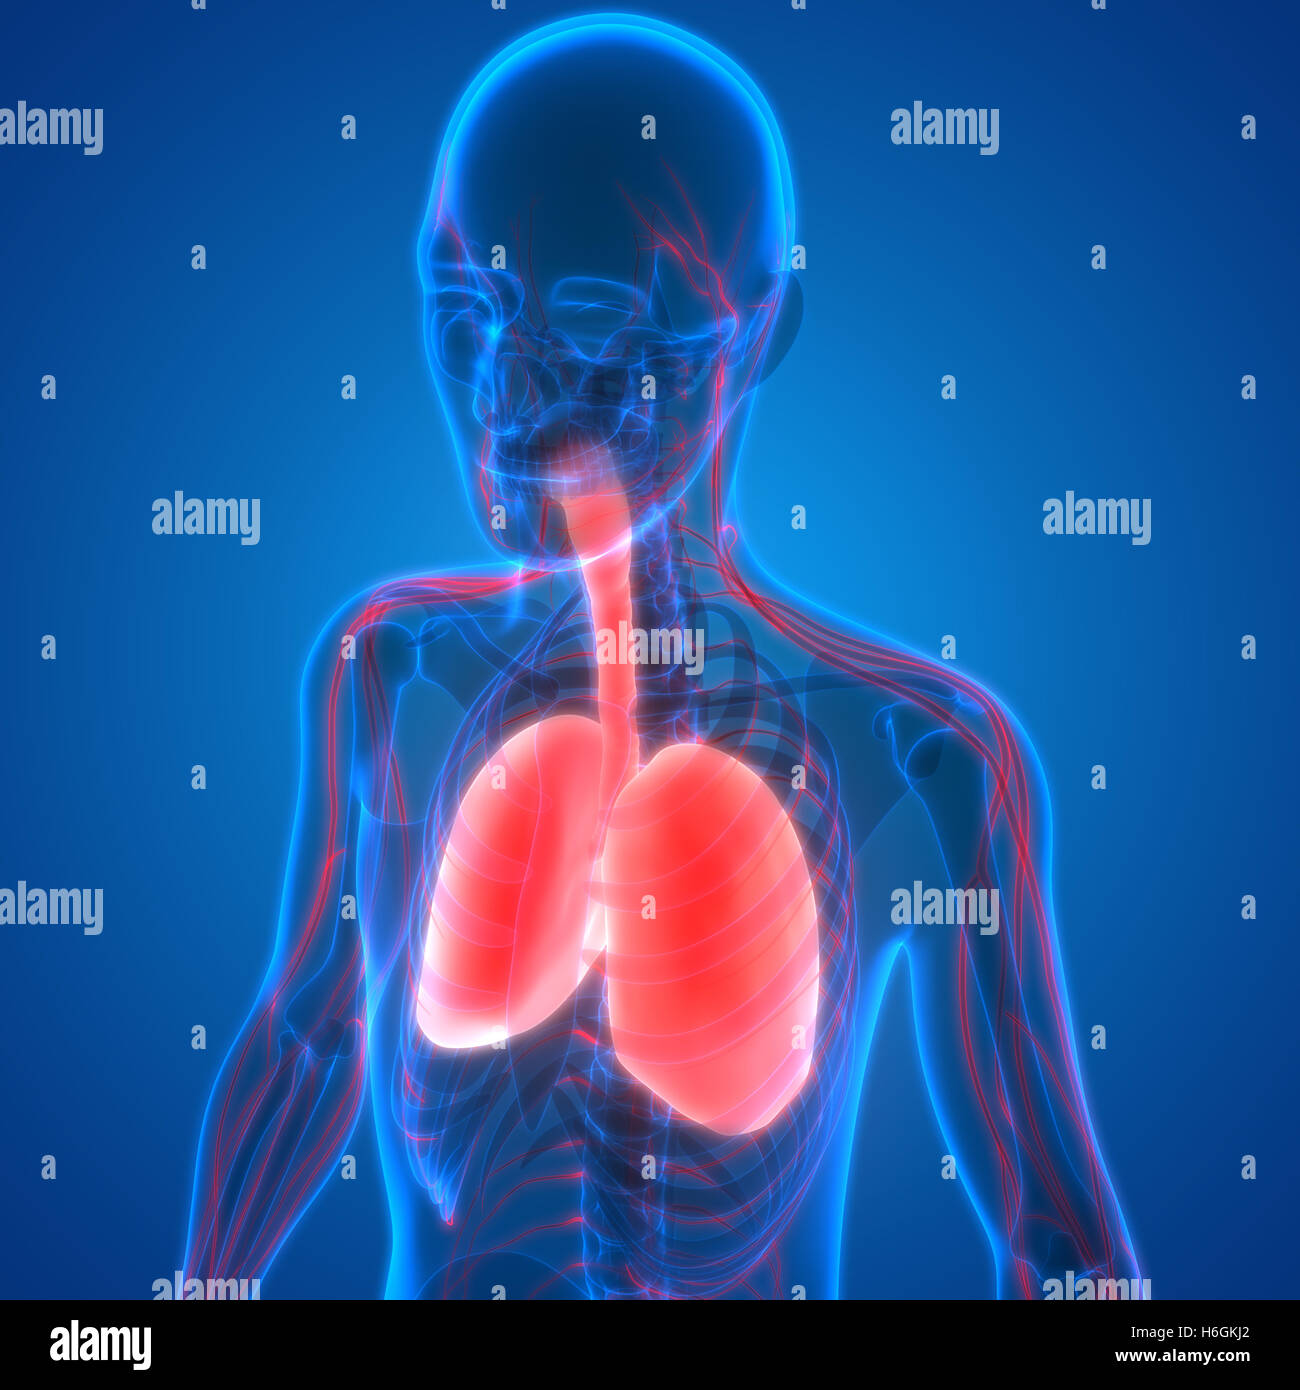 Human Respiratory System Lungs with Nervous System Anatomy Stock Photo